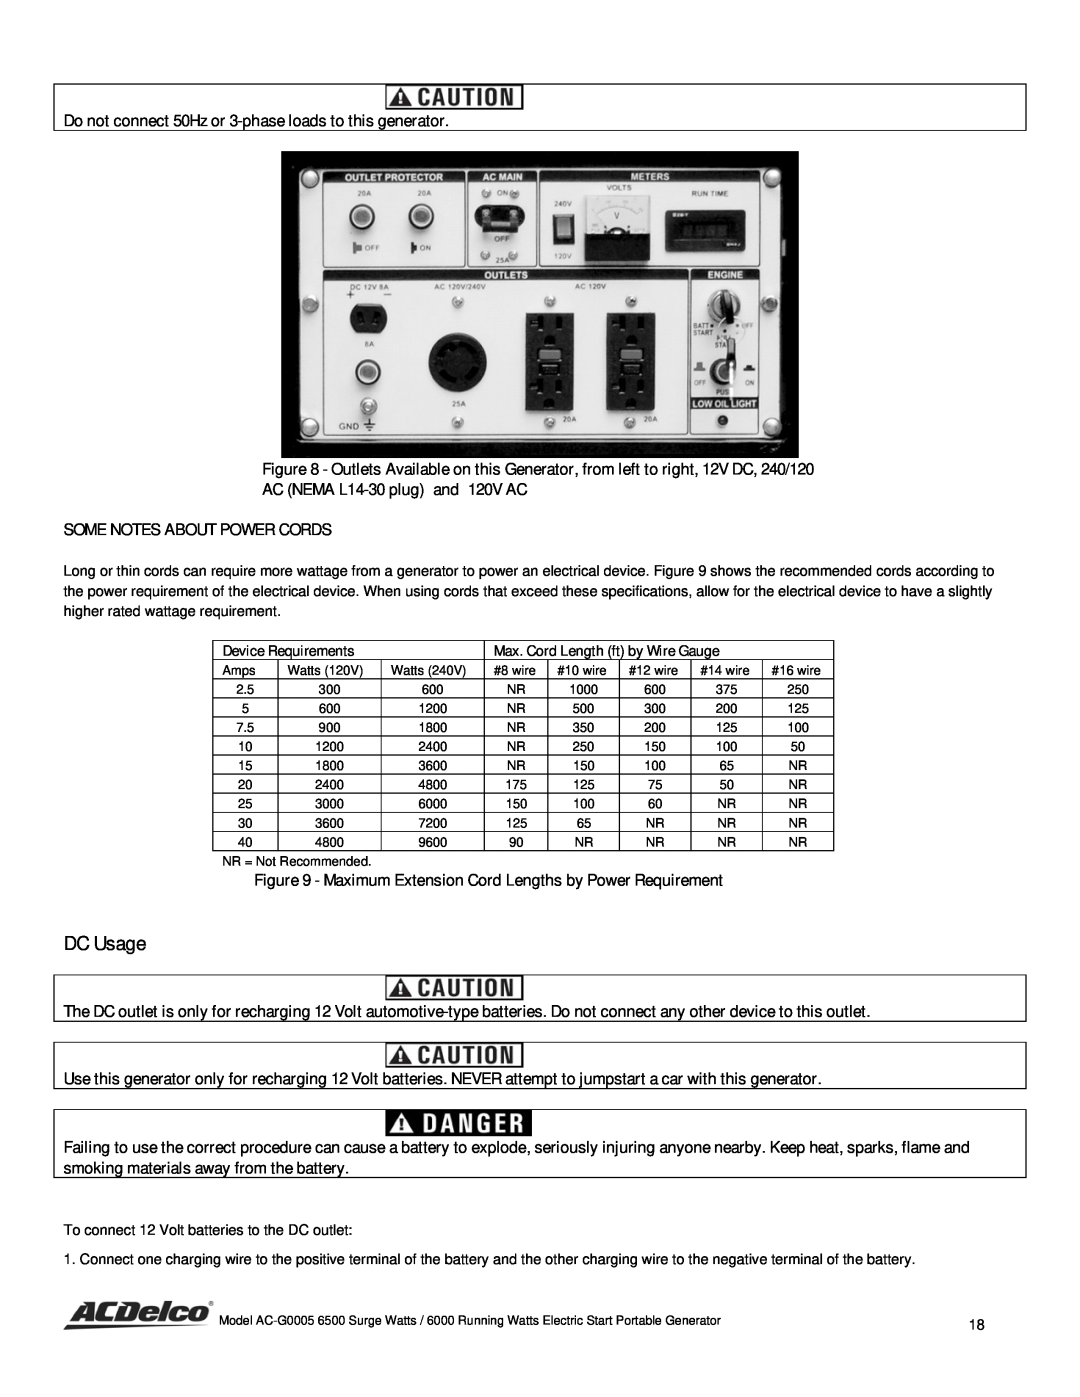 ACDelco AC-G0005 instruction manual DC Usage, Do not connect 50Hz or 3-phase loads to this generator 